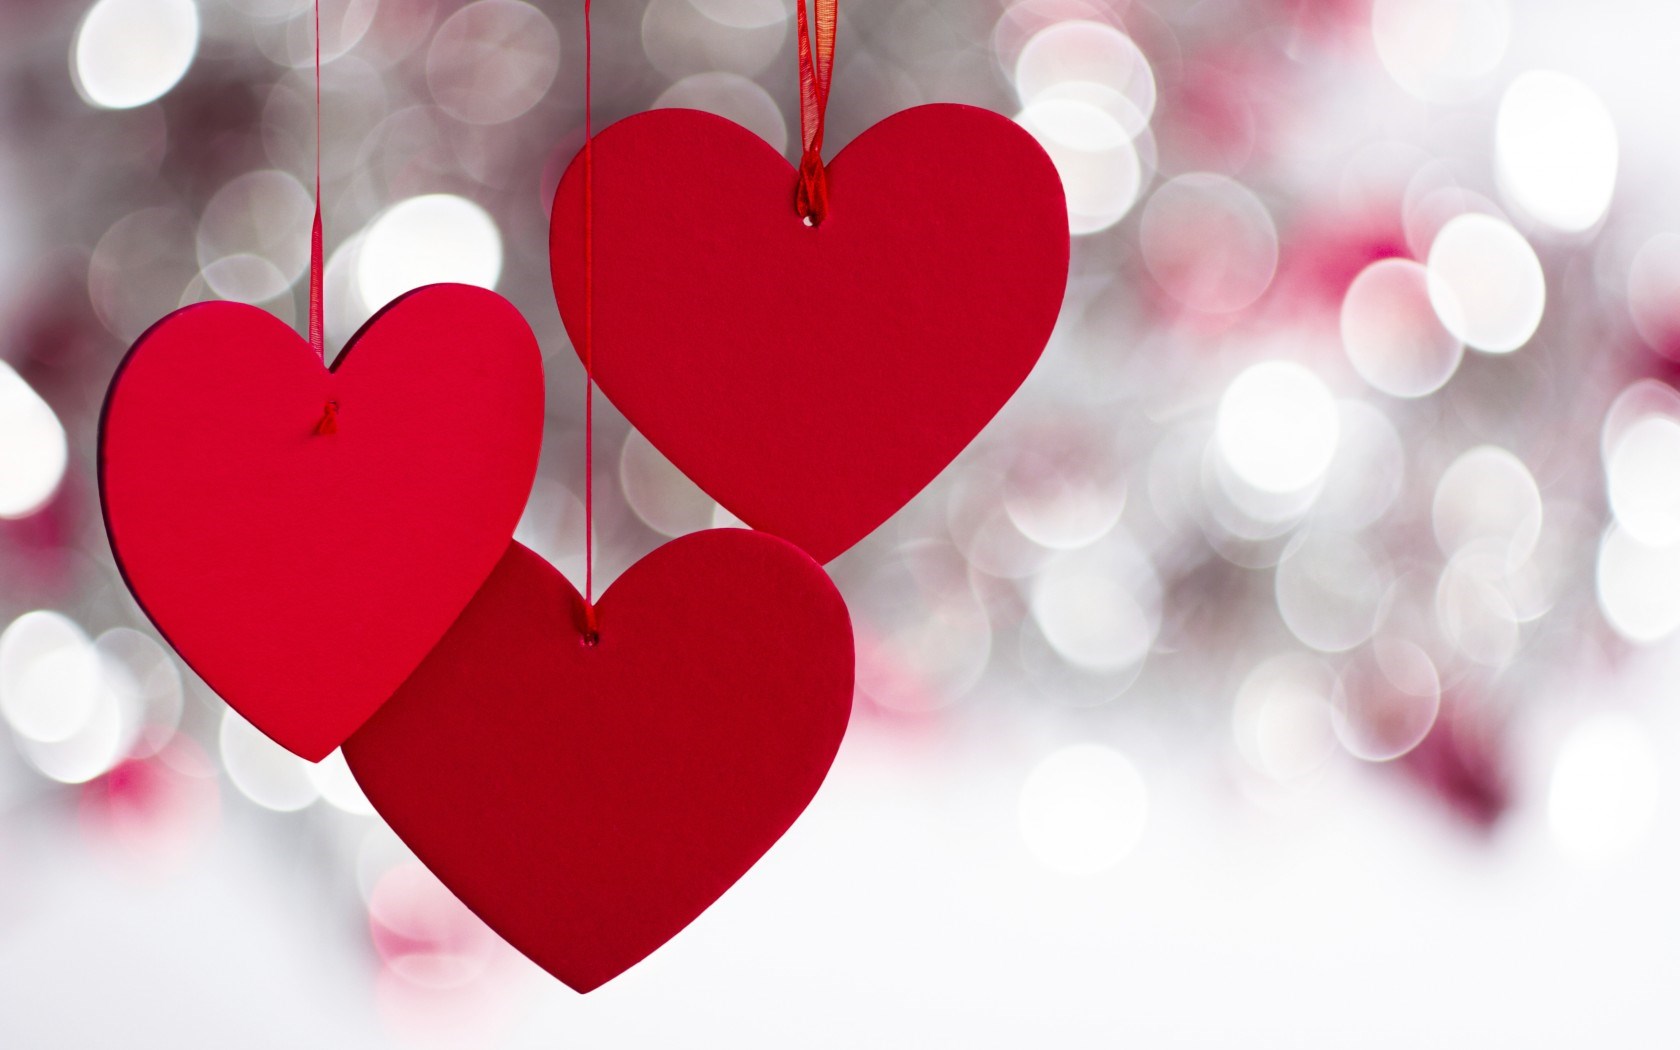 red hearts sparkle lovely valentine day bokeh photo love hd 4k background wallpapers